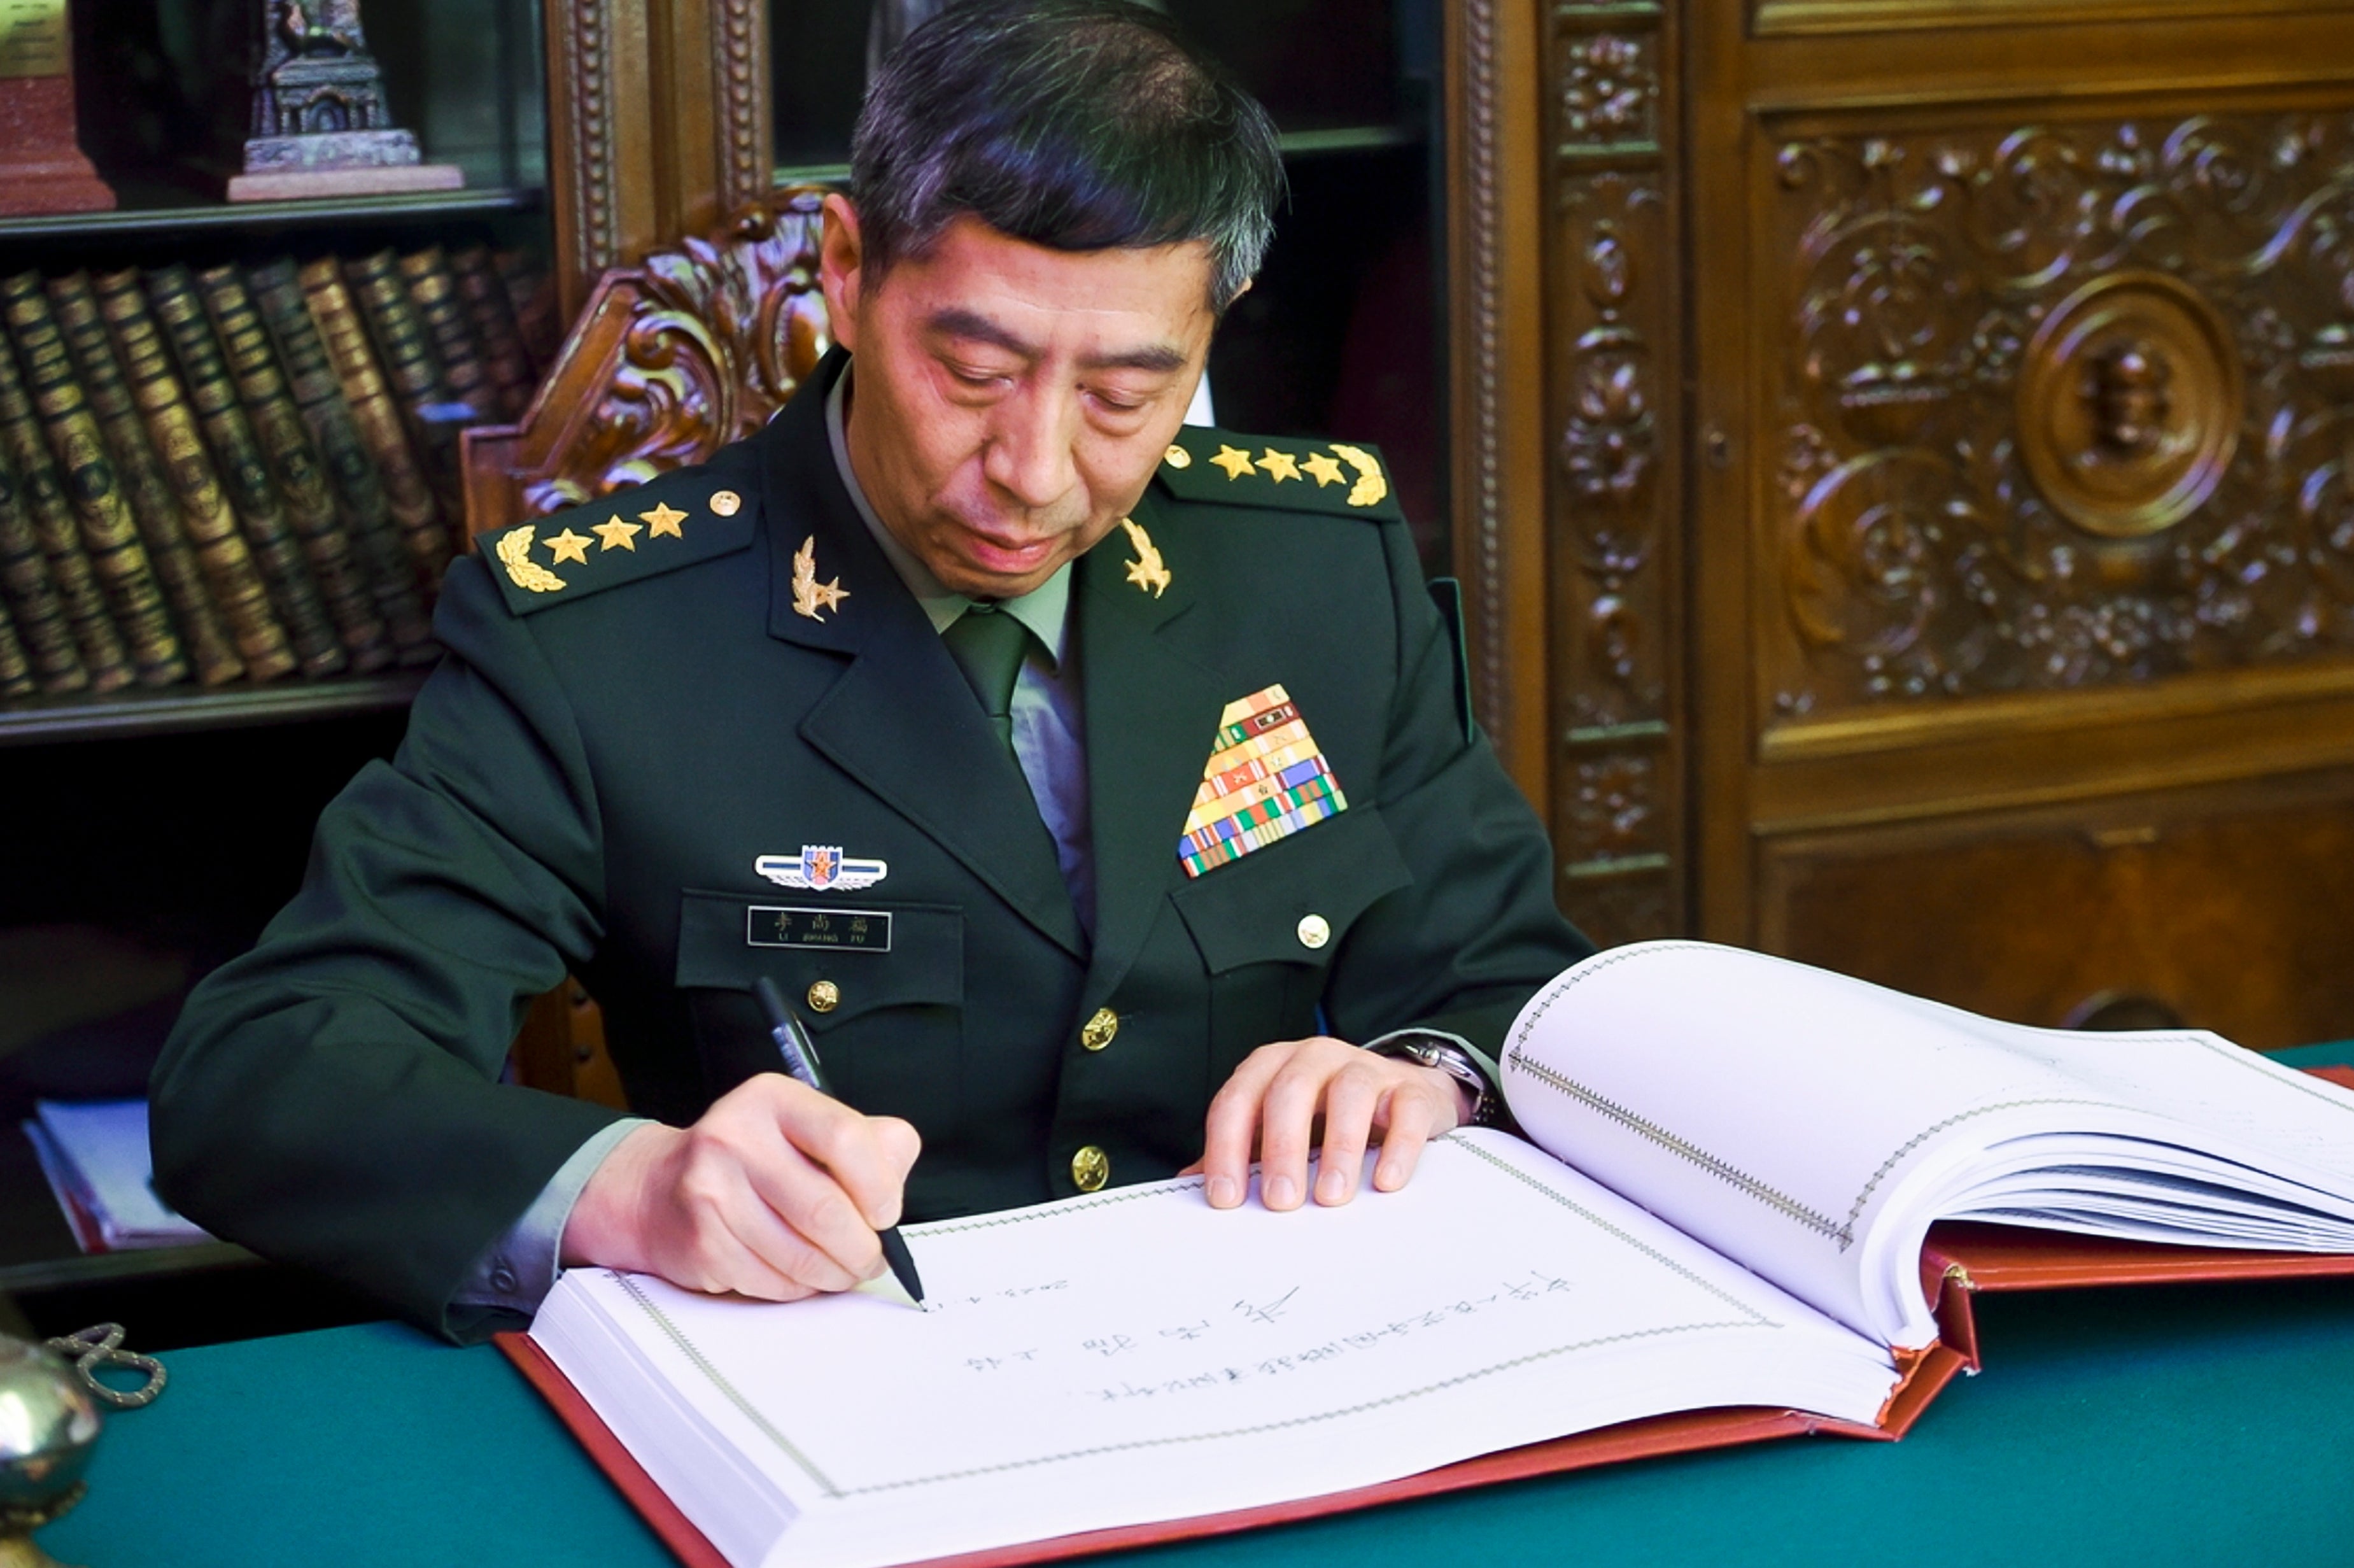 File. In this handout photo released by Russian Defense Ministry Press Service, China's Defense Minister Gen. Li Shangfu signs the book of honoured visitors after visiting to Military Academy of the General Staff of the Armed Forces of the Russian Federation in Moscow, Russia, Monday, April 17, 2023